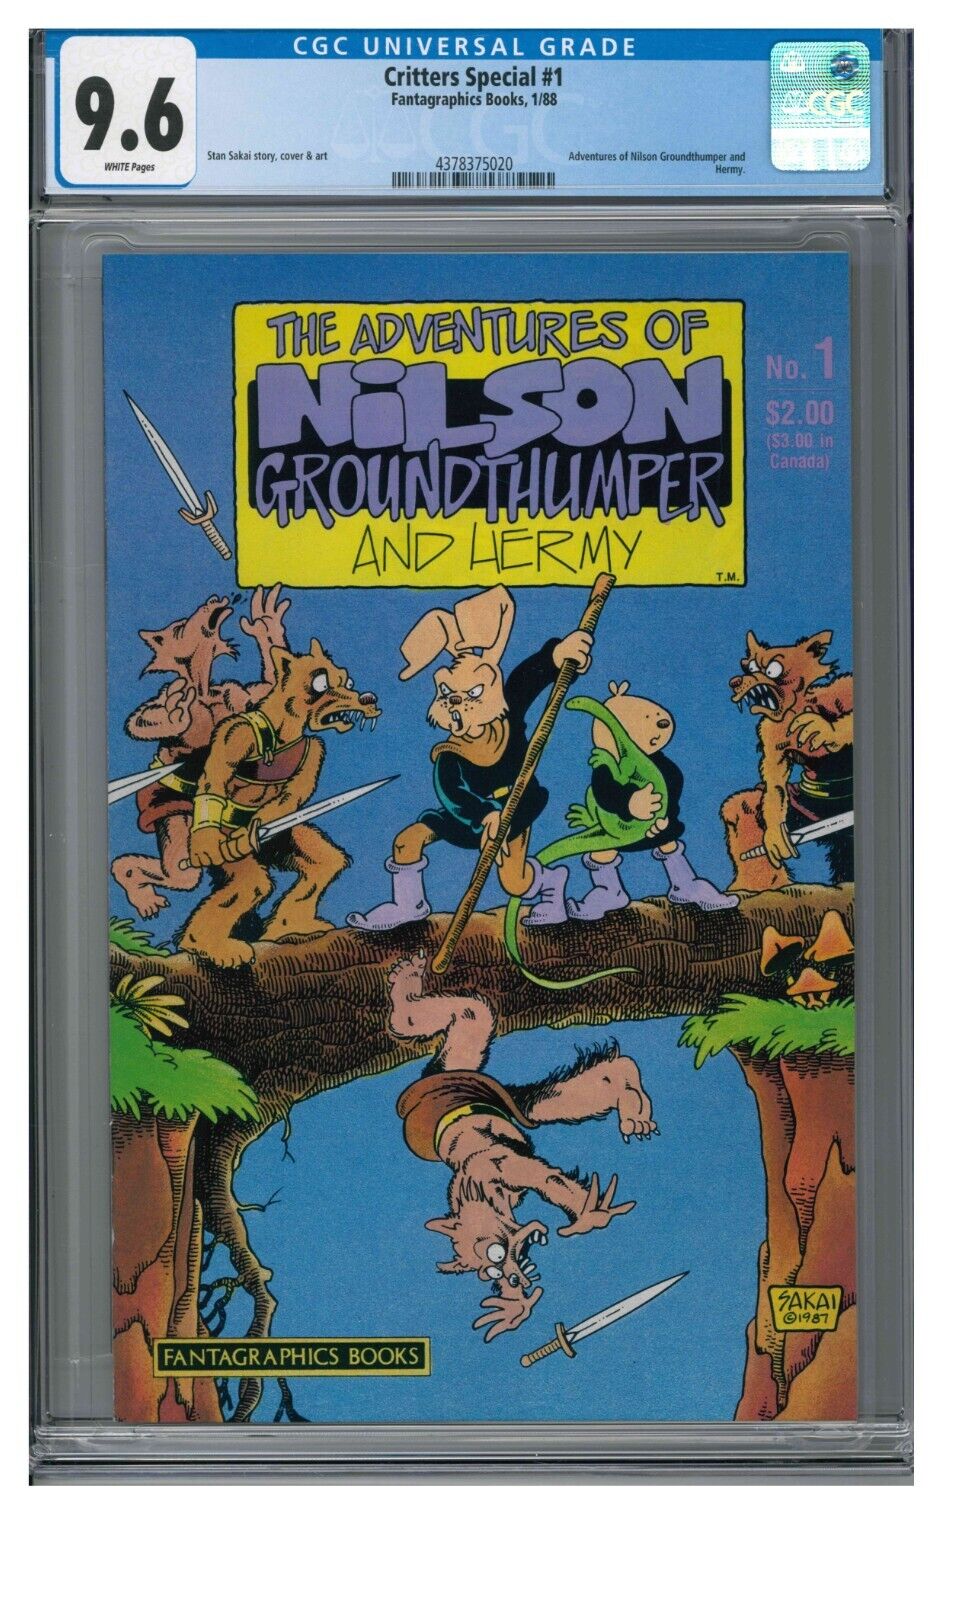 Critters Special #1 (1988) Fantagraphics Nilson Groundthumper CGC 9.6 PX002